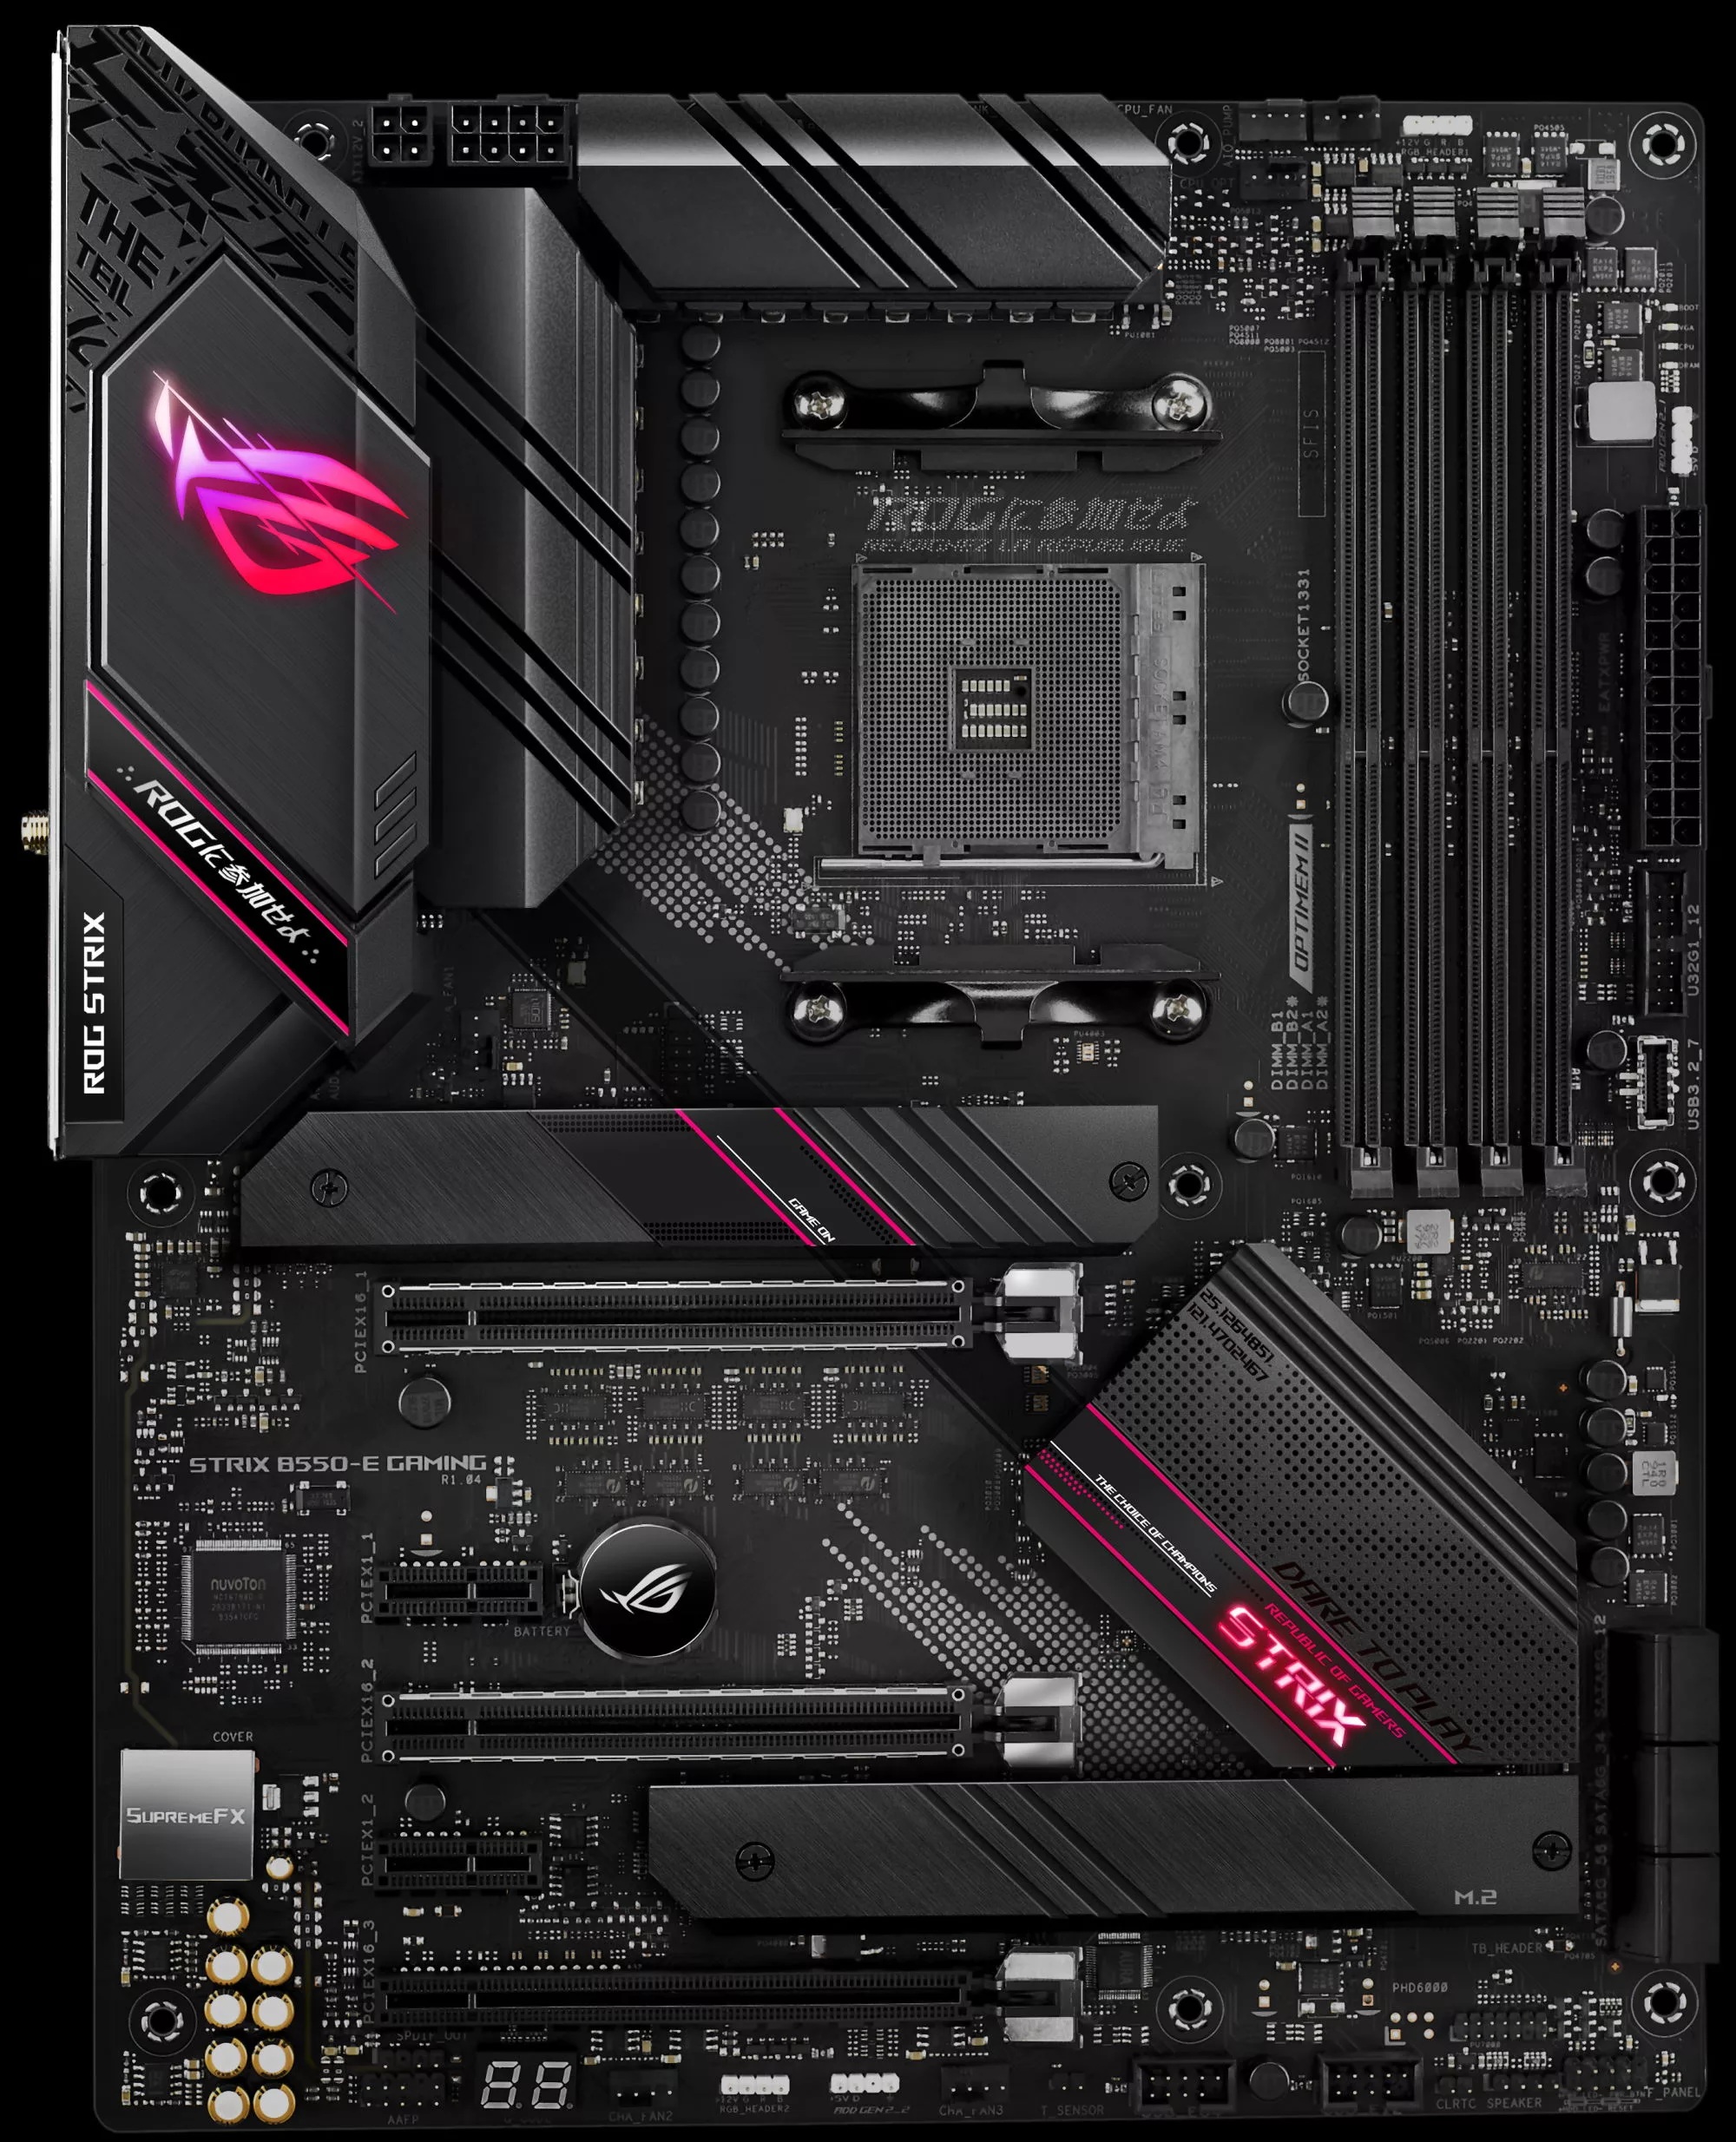 ROG Strix B550 motherboards power up mainstream AMD gaming builds